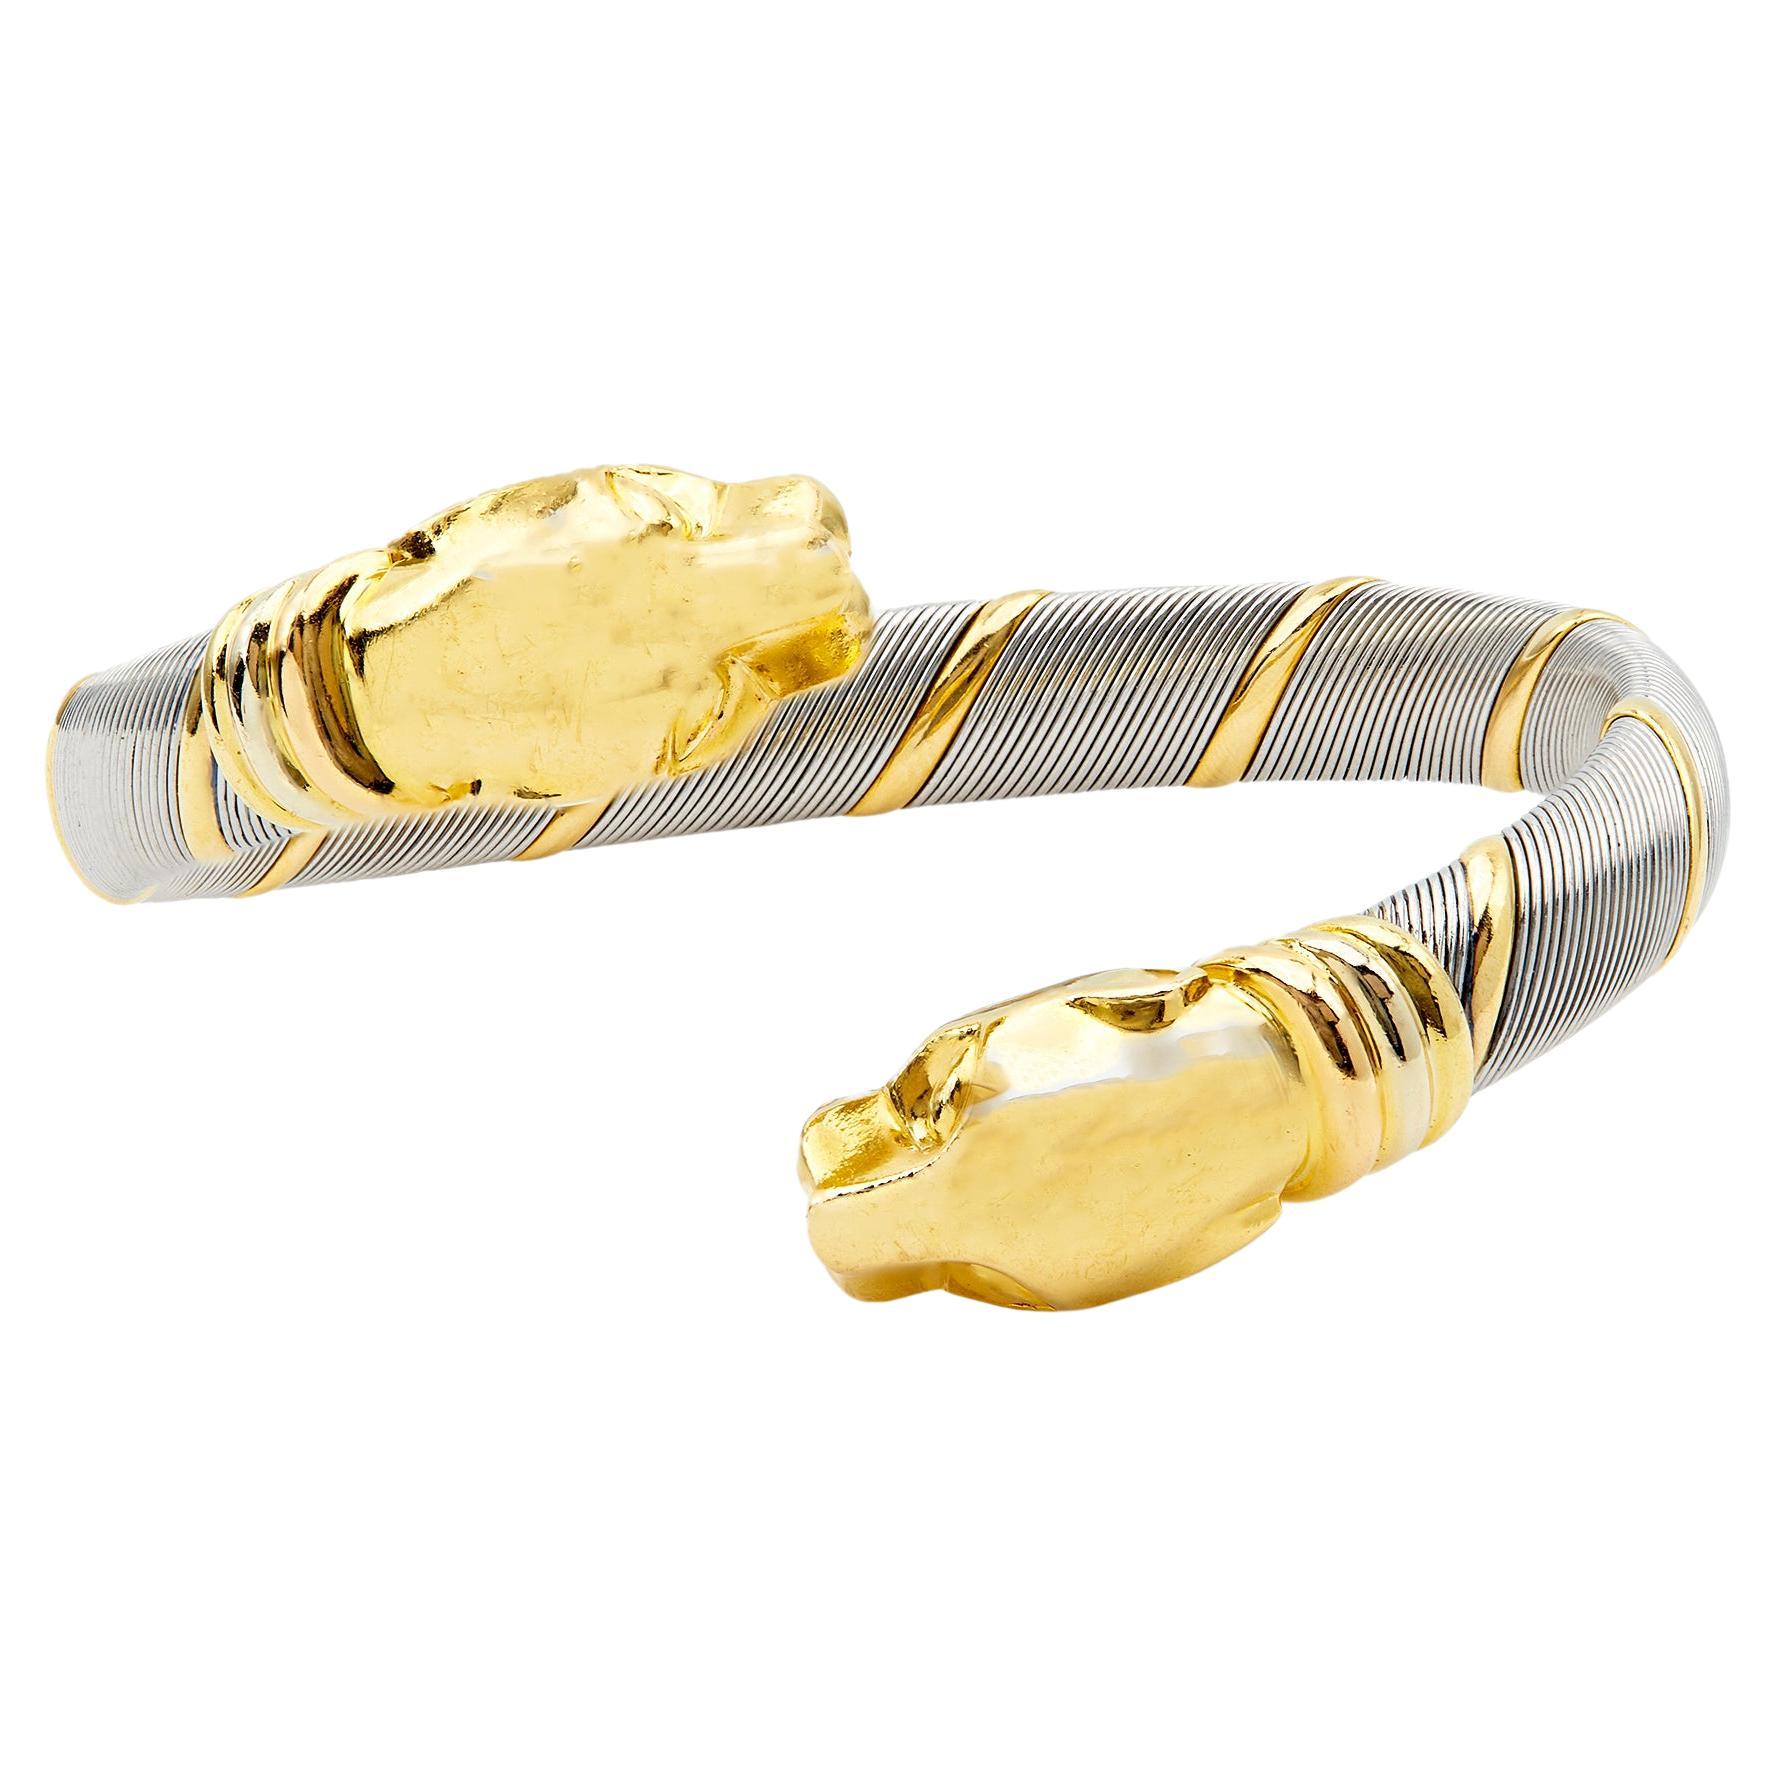 Vintage Cartier Stainless Steel and 18k Yellow Gold Panthère Bangle